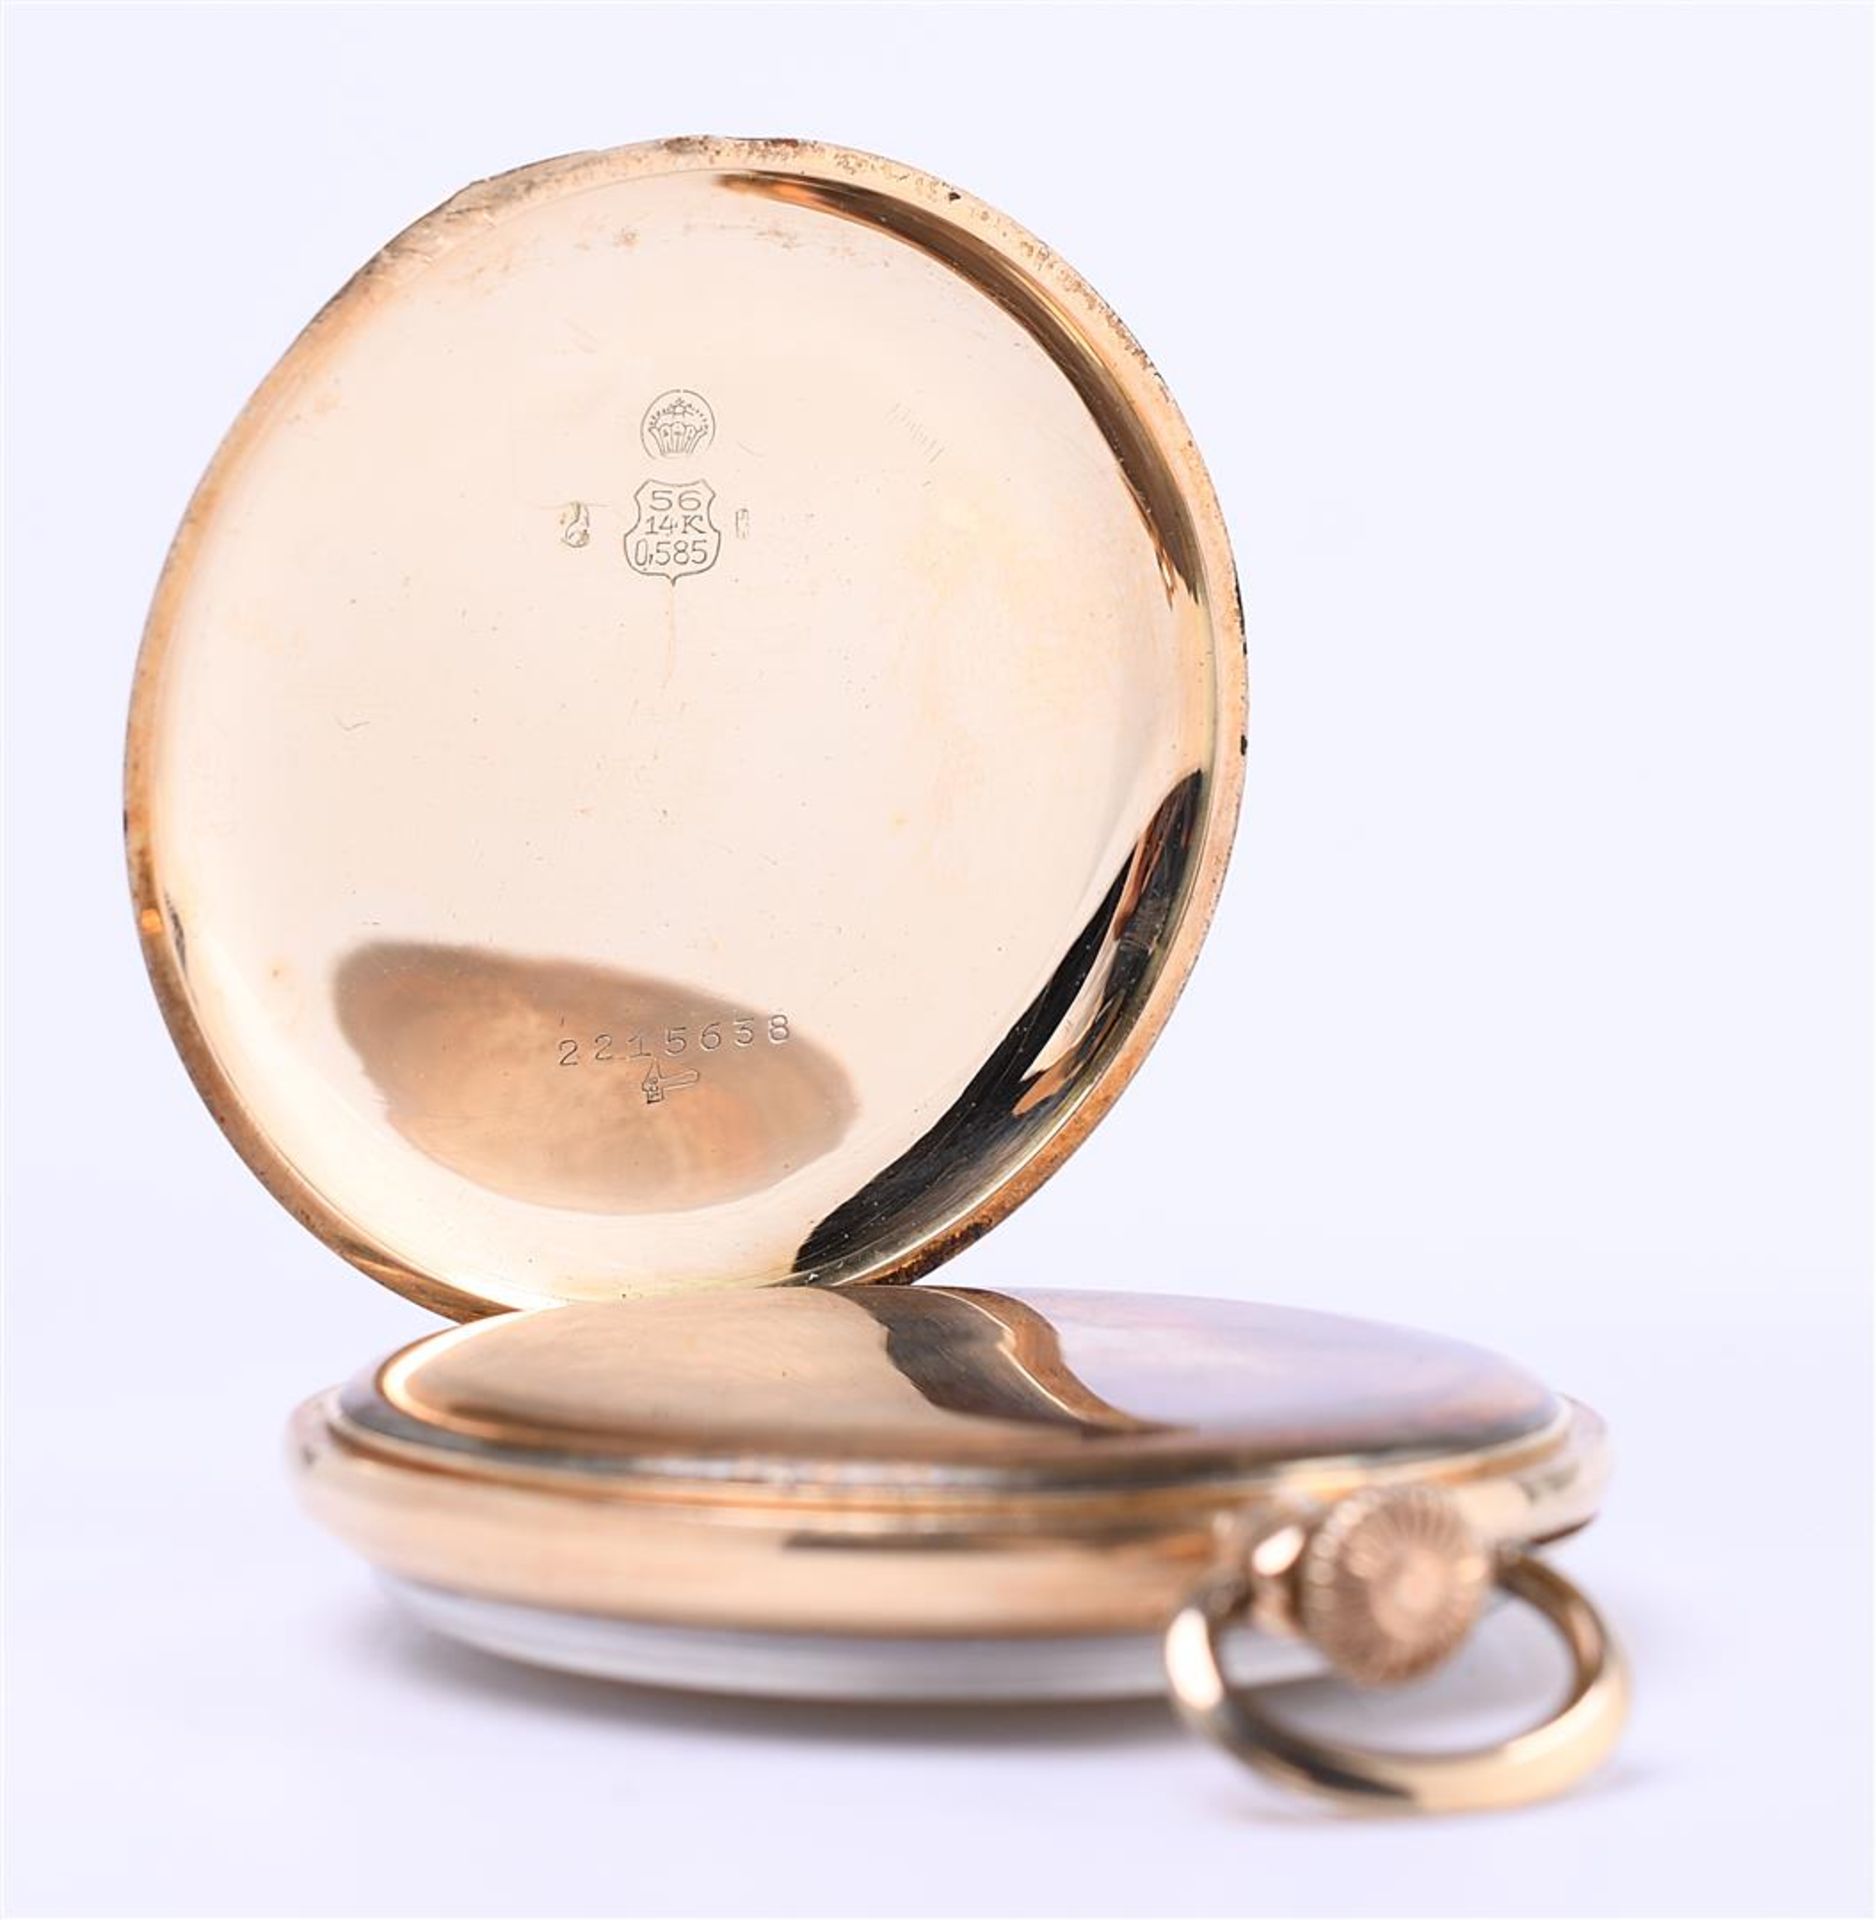 14 kt yellow gold pocket watch with Arabic numerals and second hand. ca. 1925 - Image 3 of 4